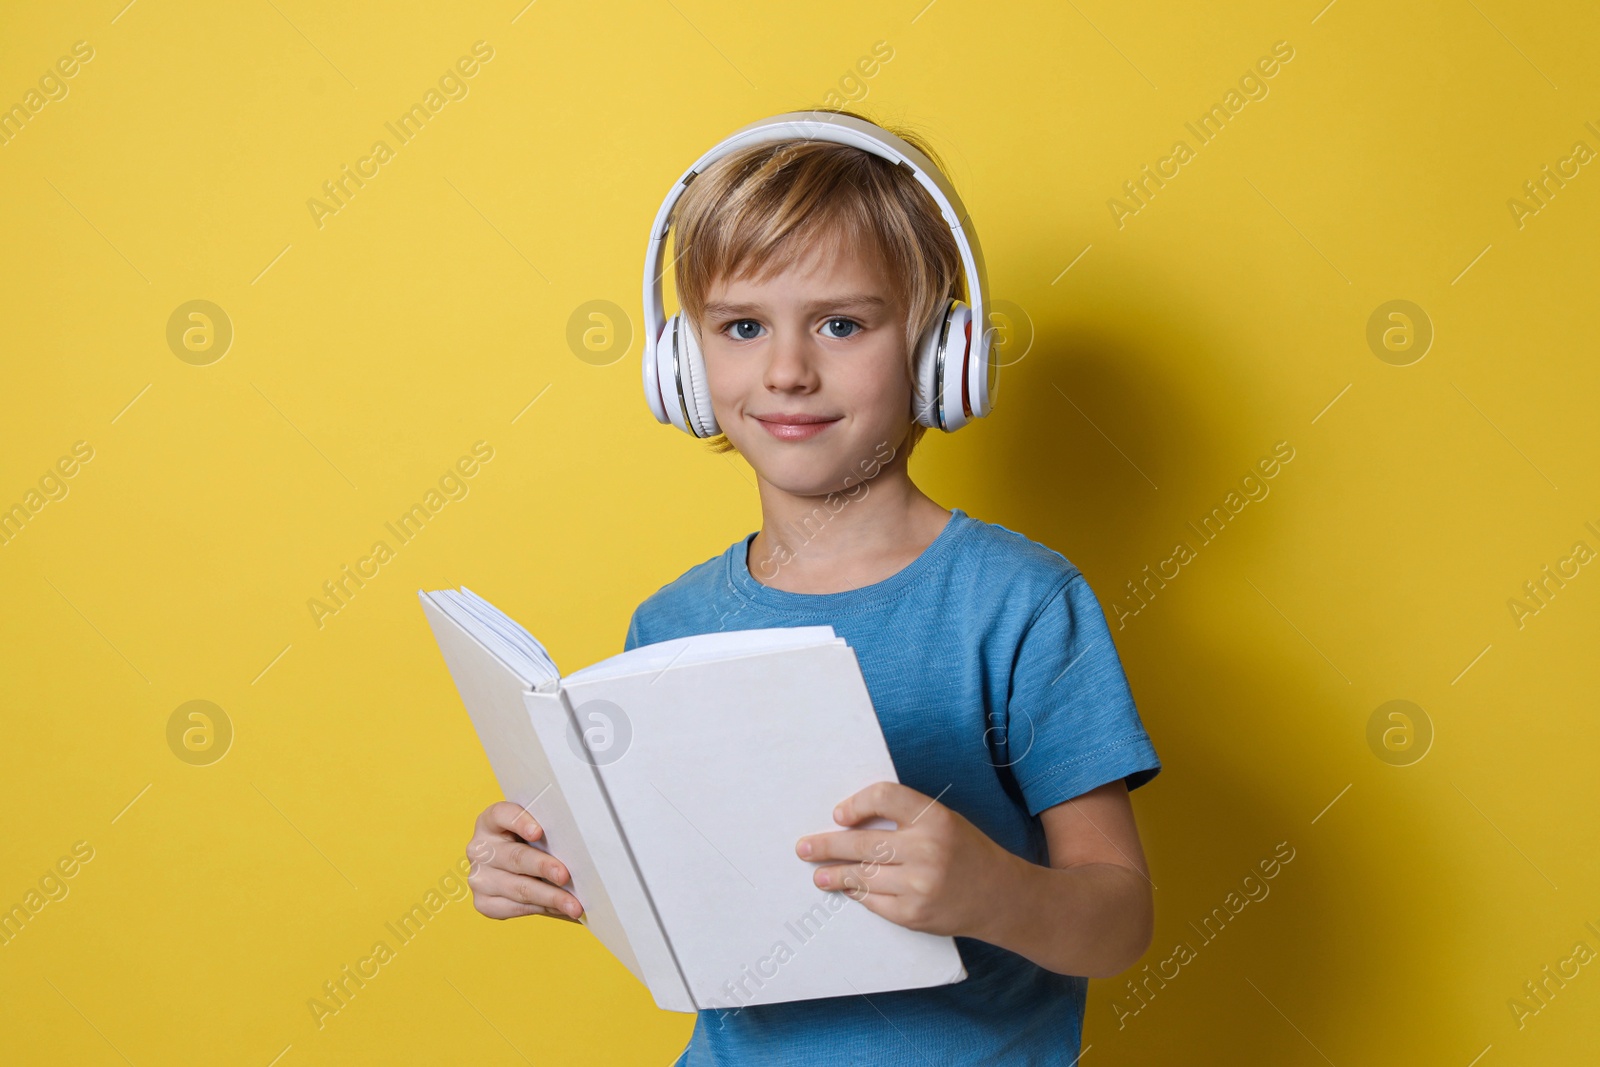 Photo of Cute little boy with headphones listening to audiobook on yellow background